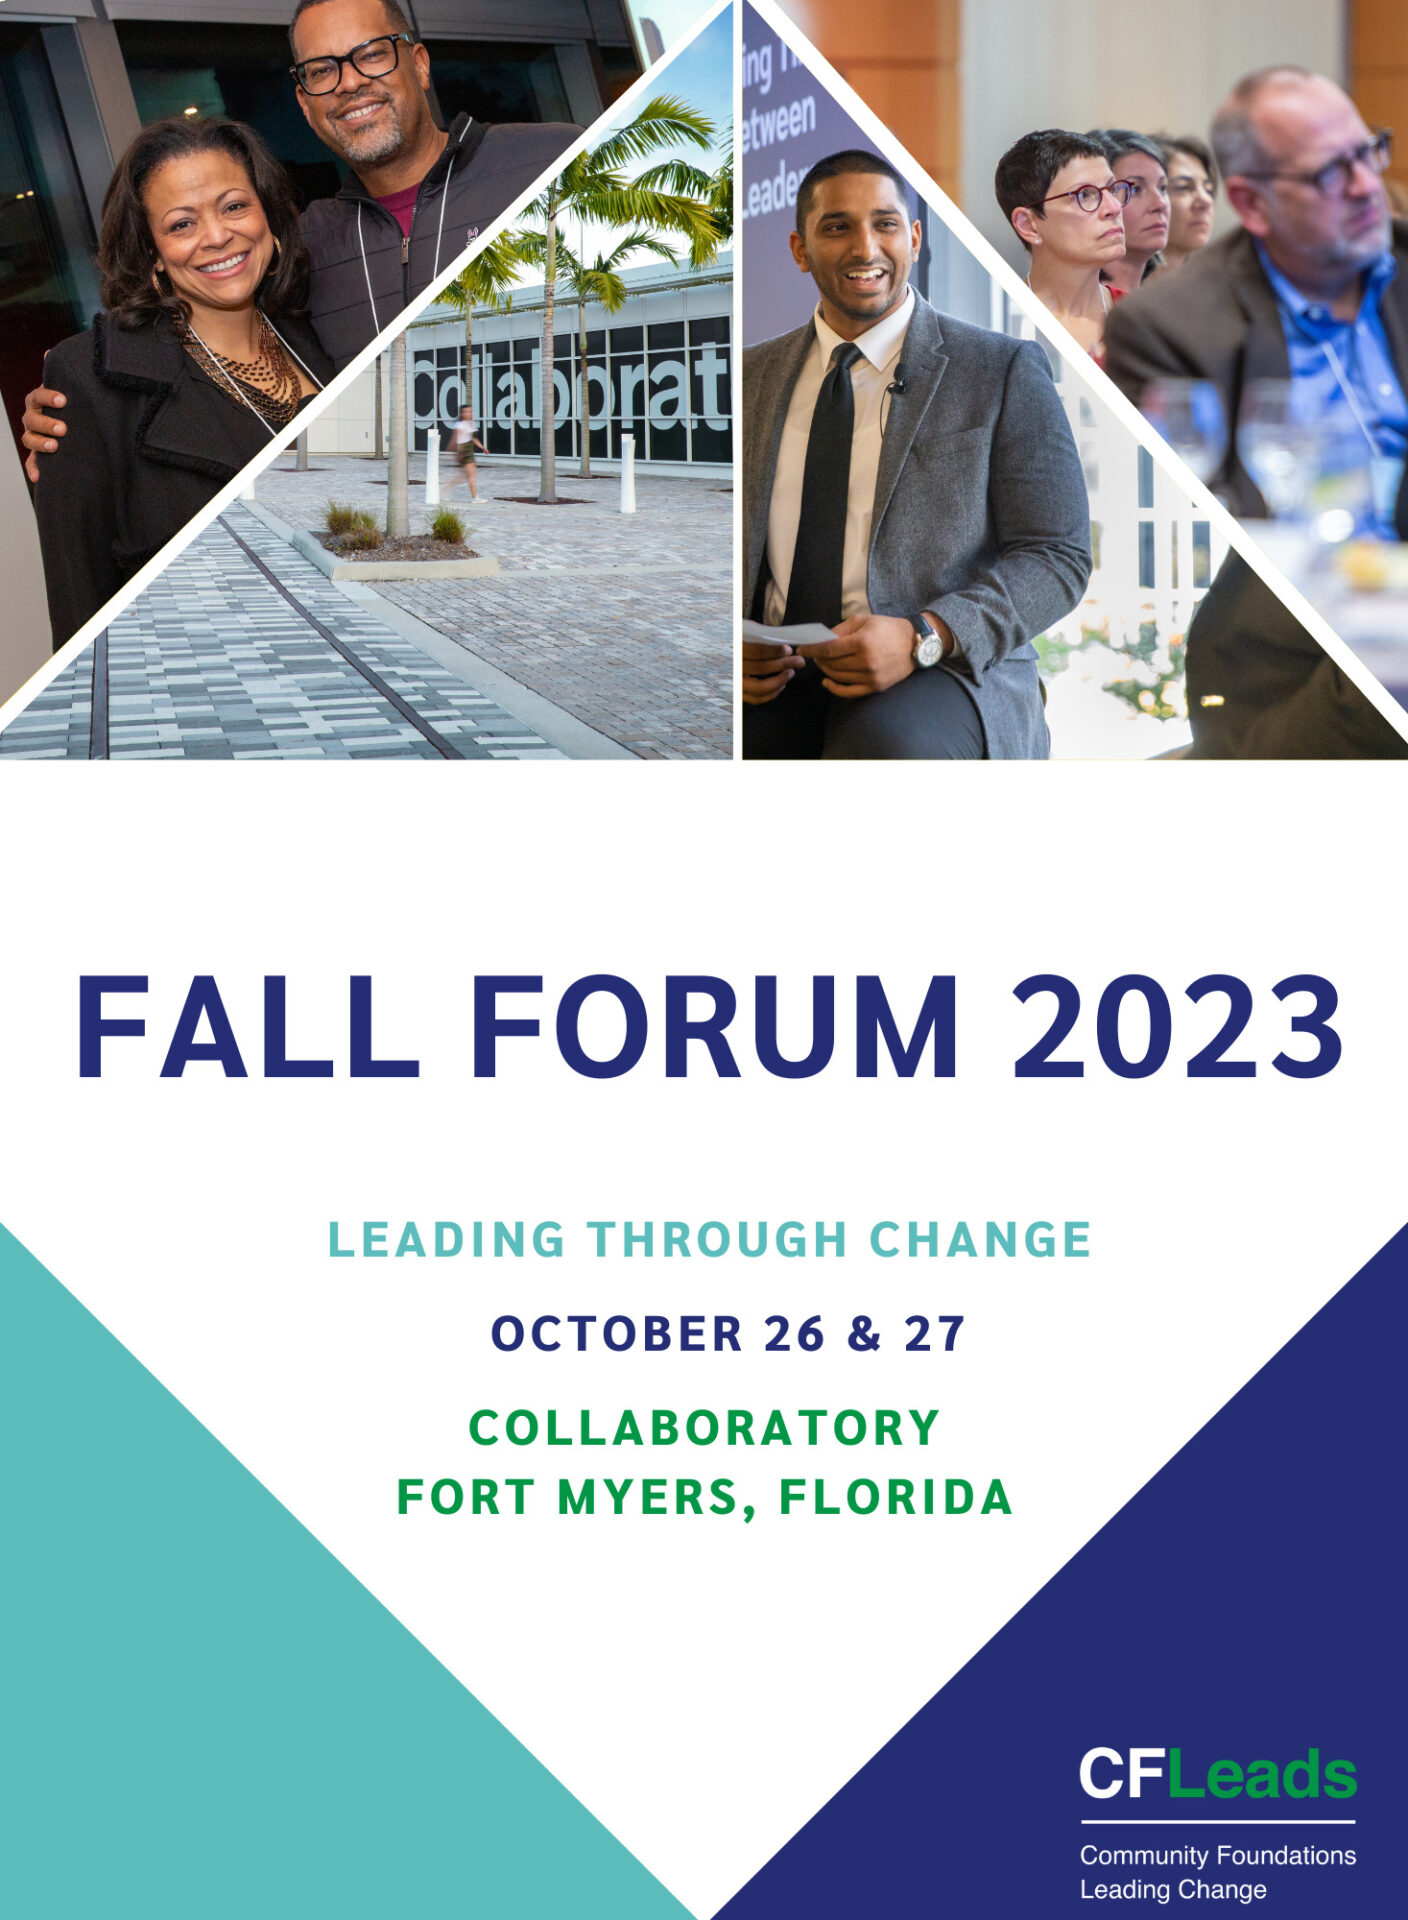 Poster with details about Fall Forum.